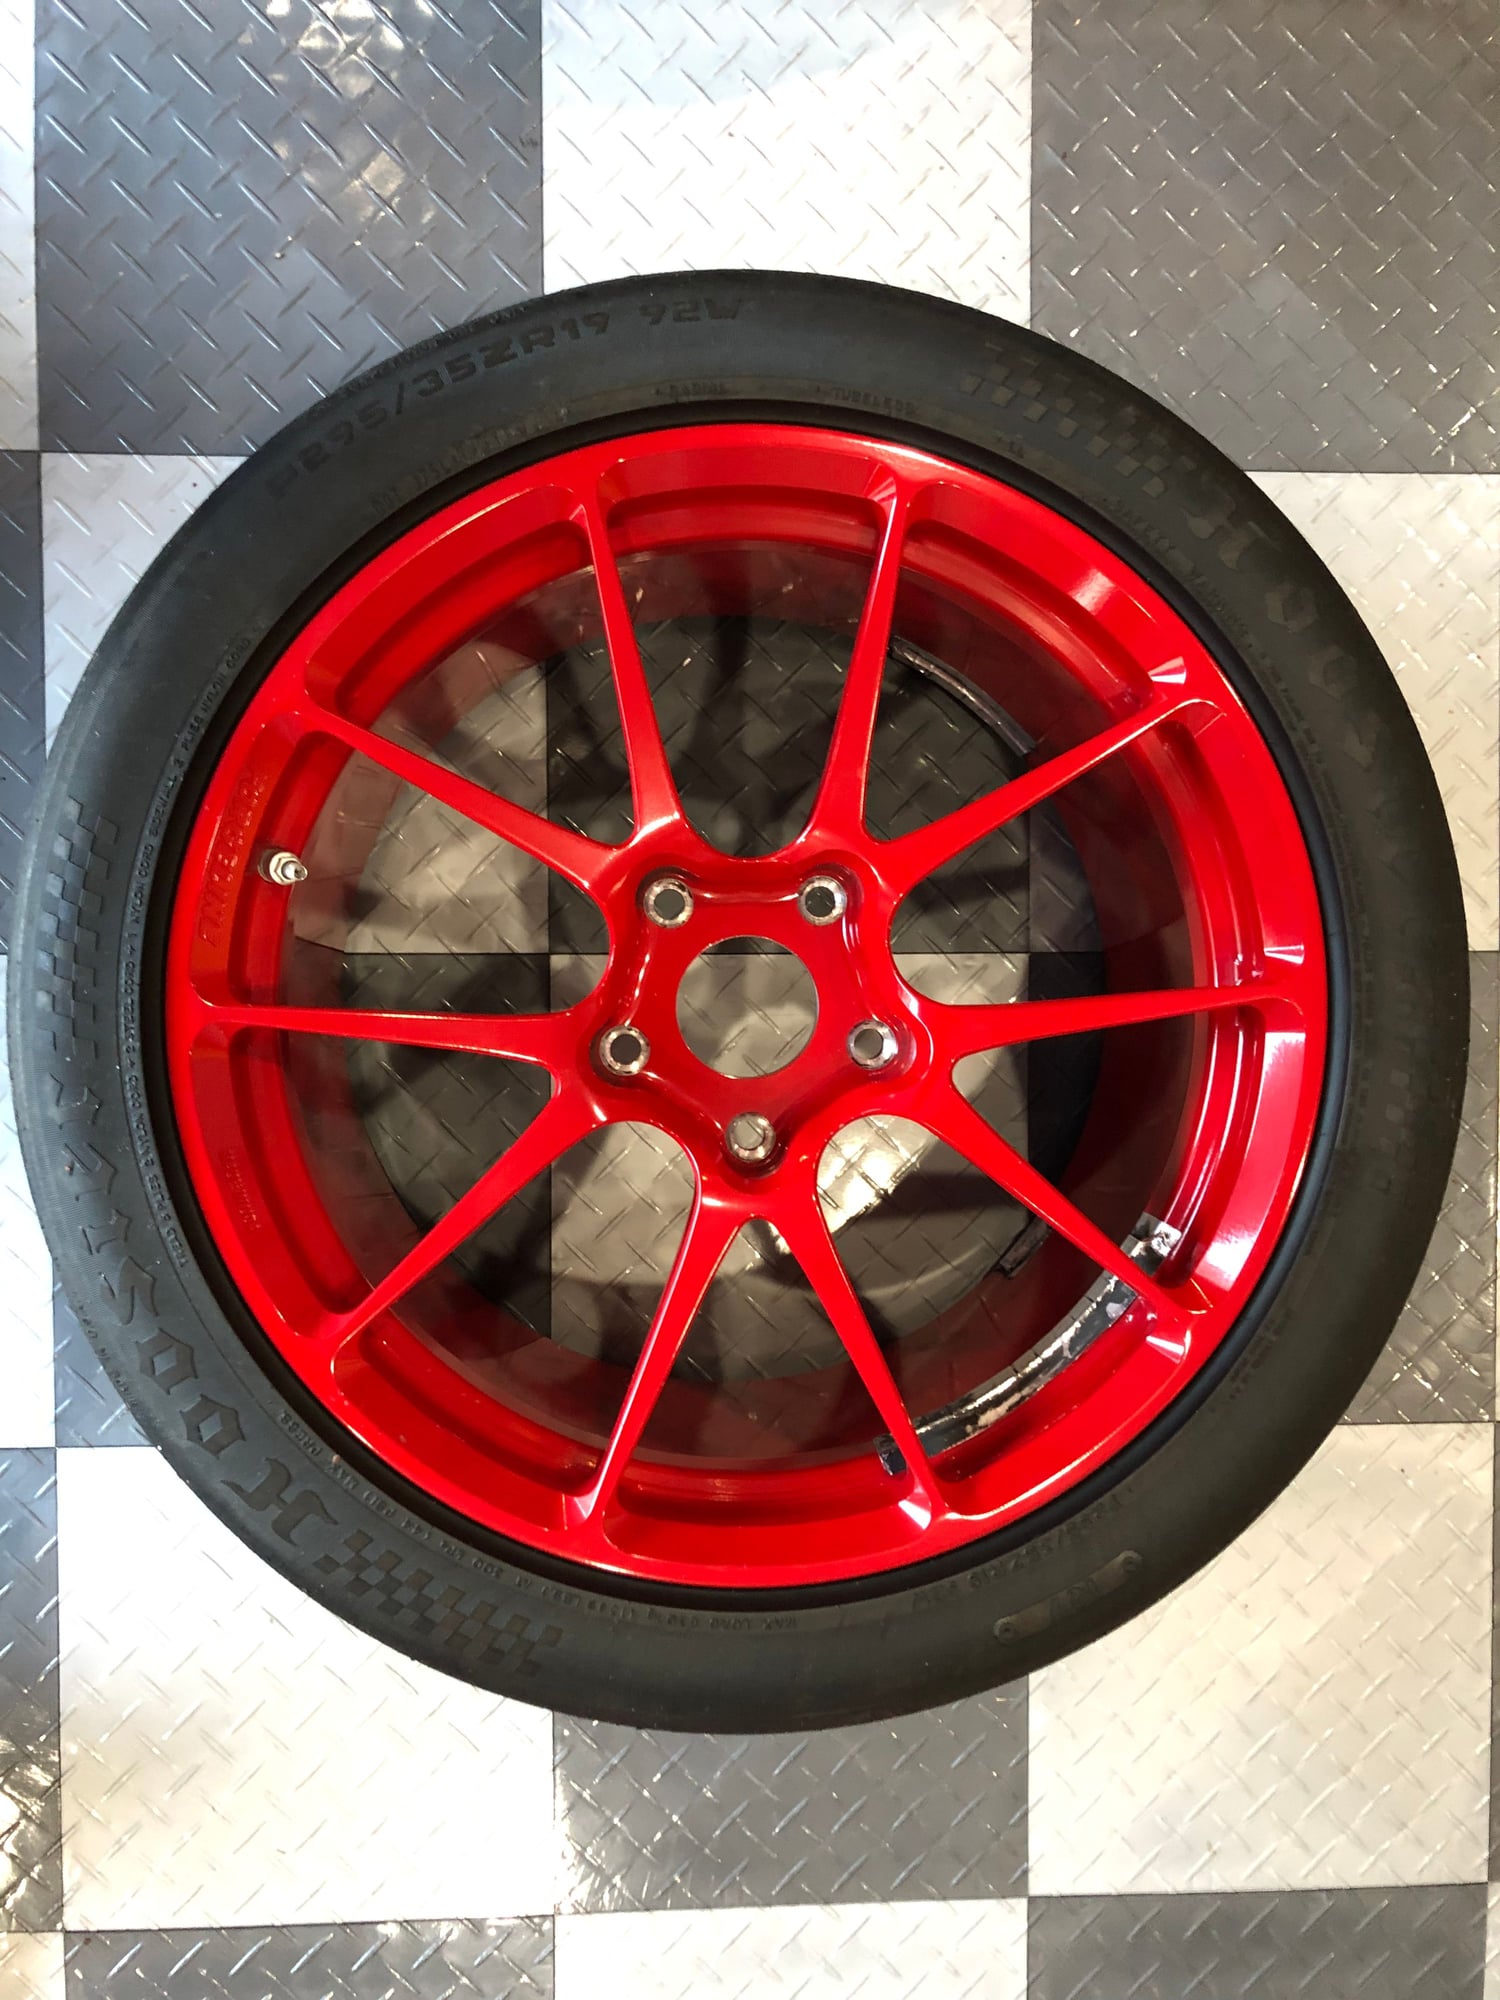 Wheels and Tires/Axles - Forgeline Wheels - GS1R - Used - 2016 Porsche Cayman GT4 - Indialantic, FL 32903, United States